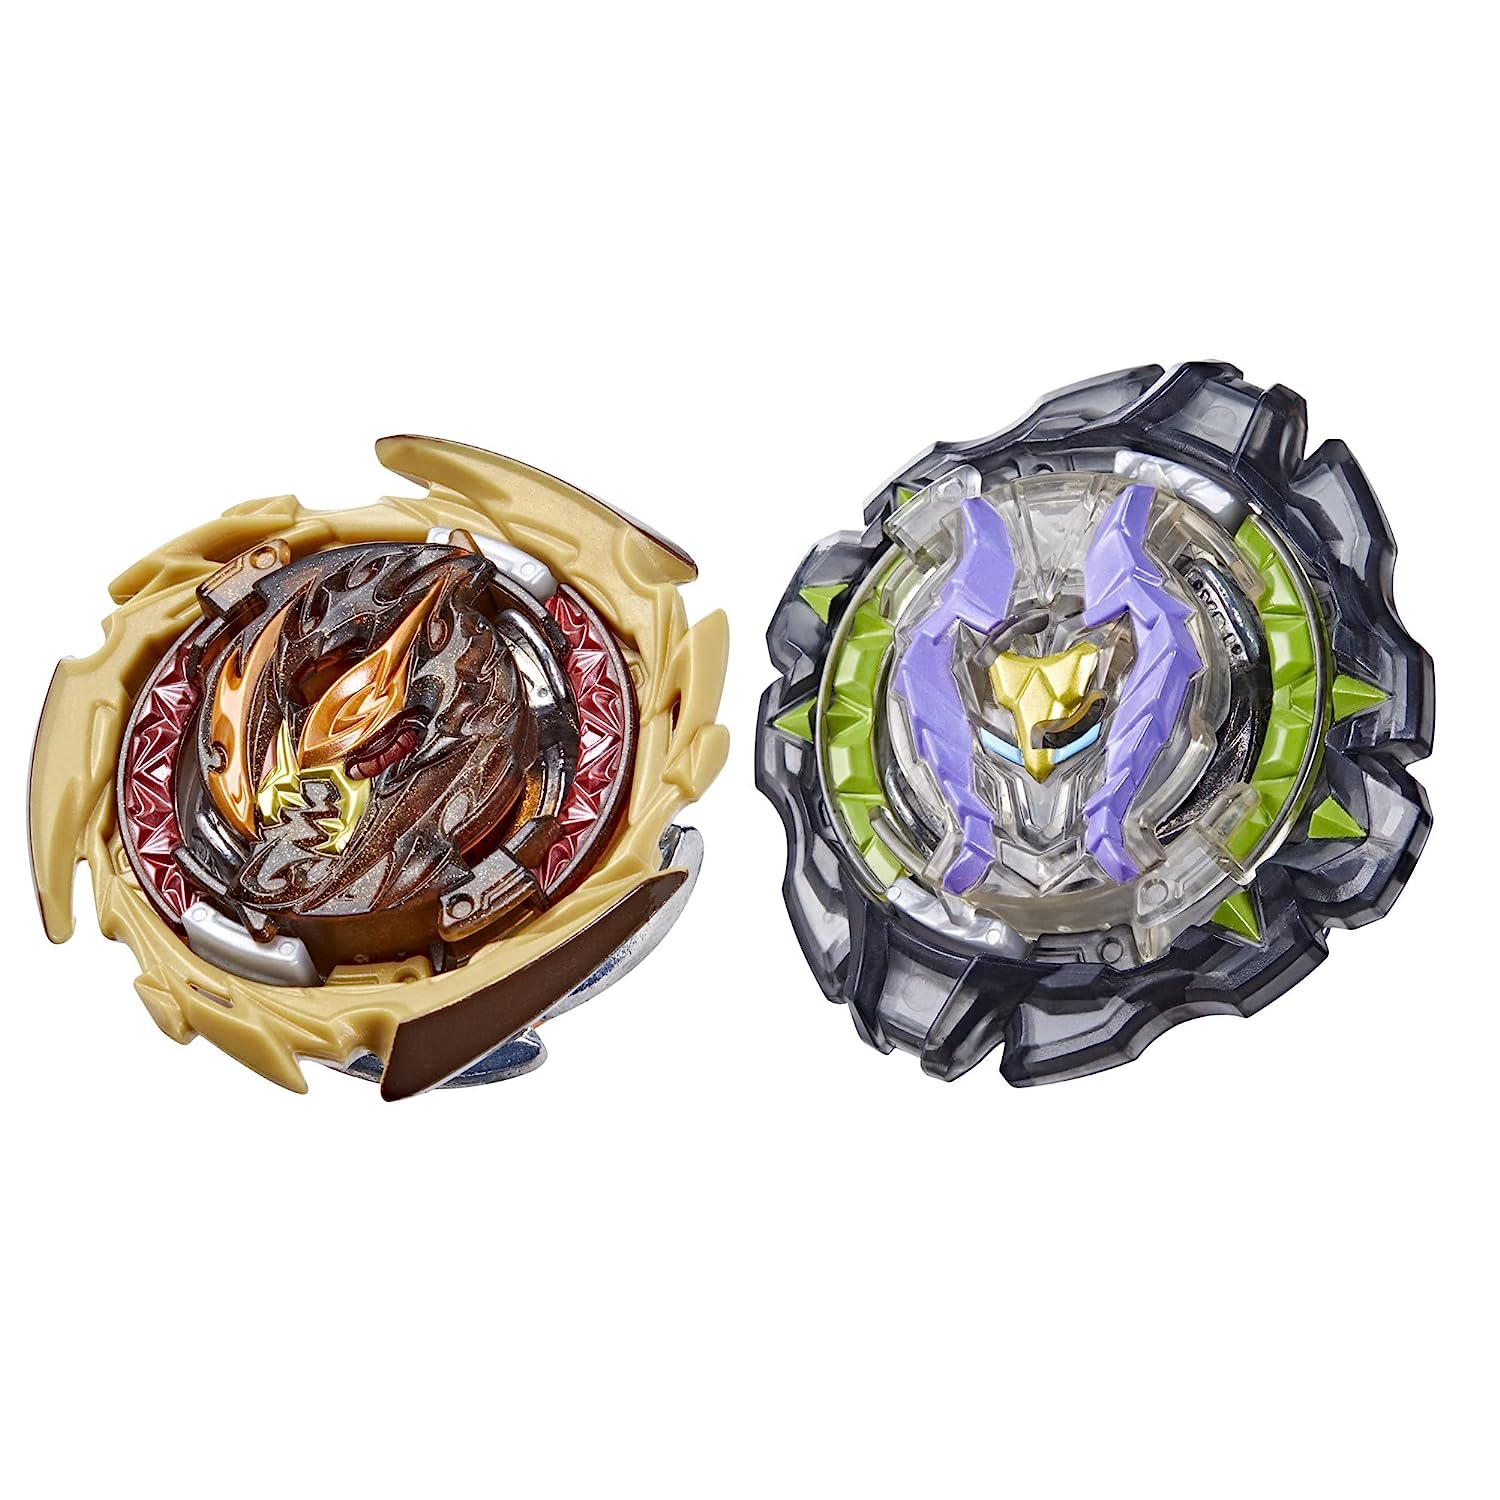 Beyblade Burst QuadDrive Destruction Ifritor I7 and Stone Nemesis N7 Spinning Top Dual Pack for Kids Ages 8 and Up